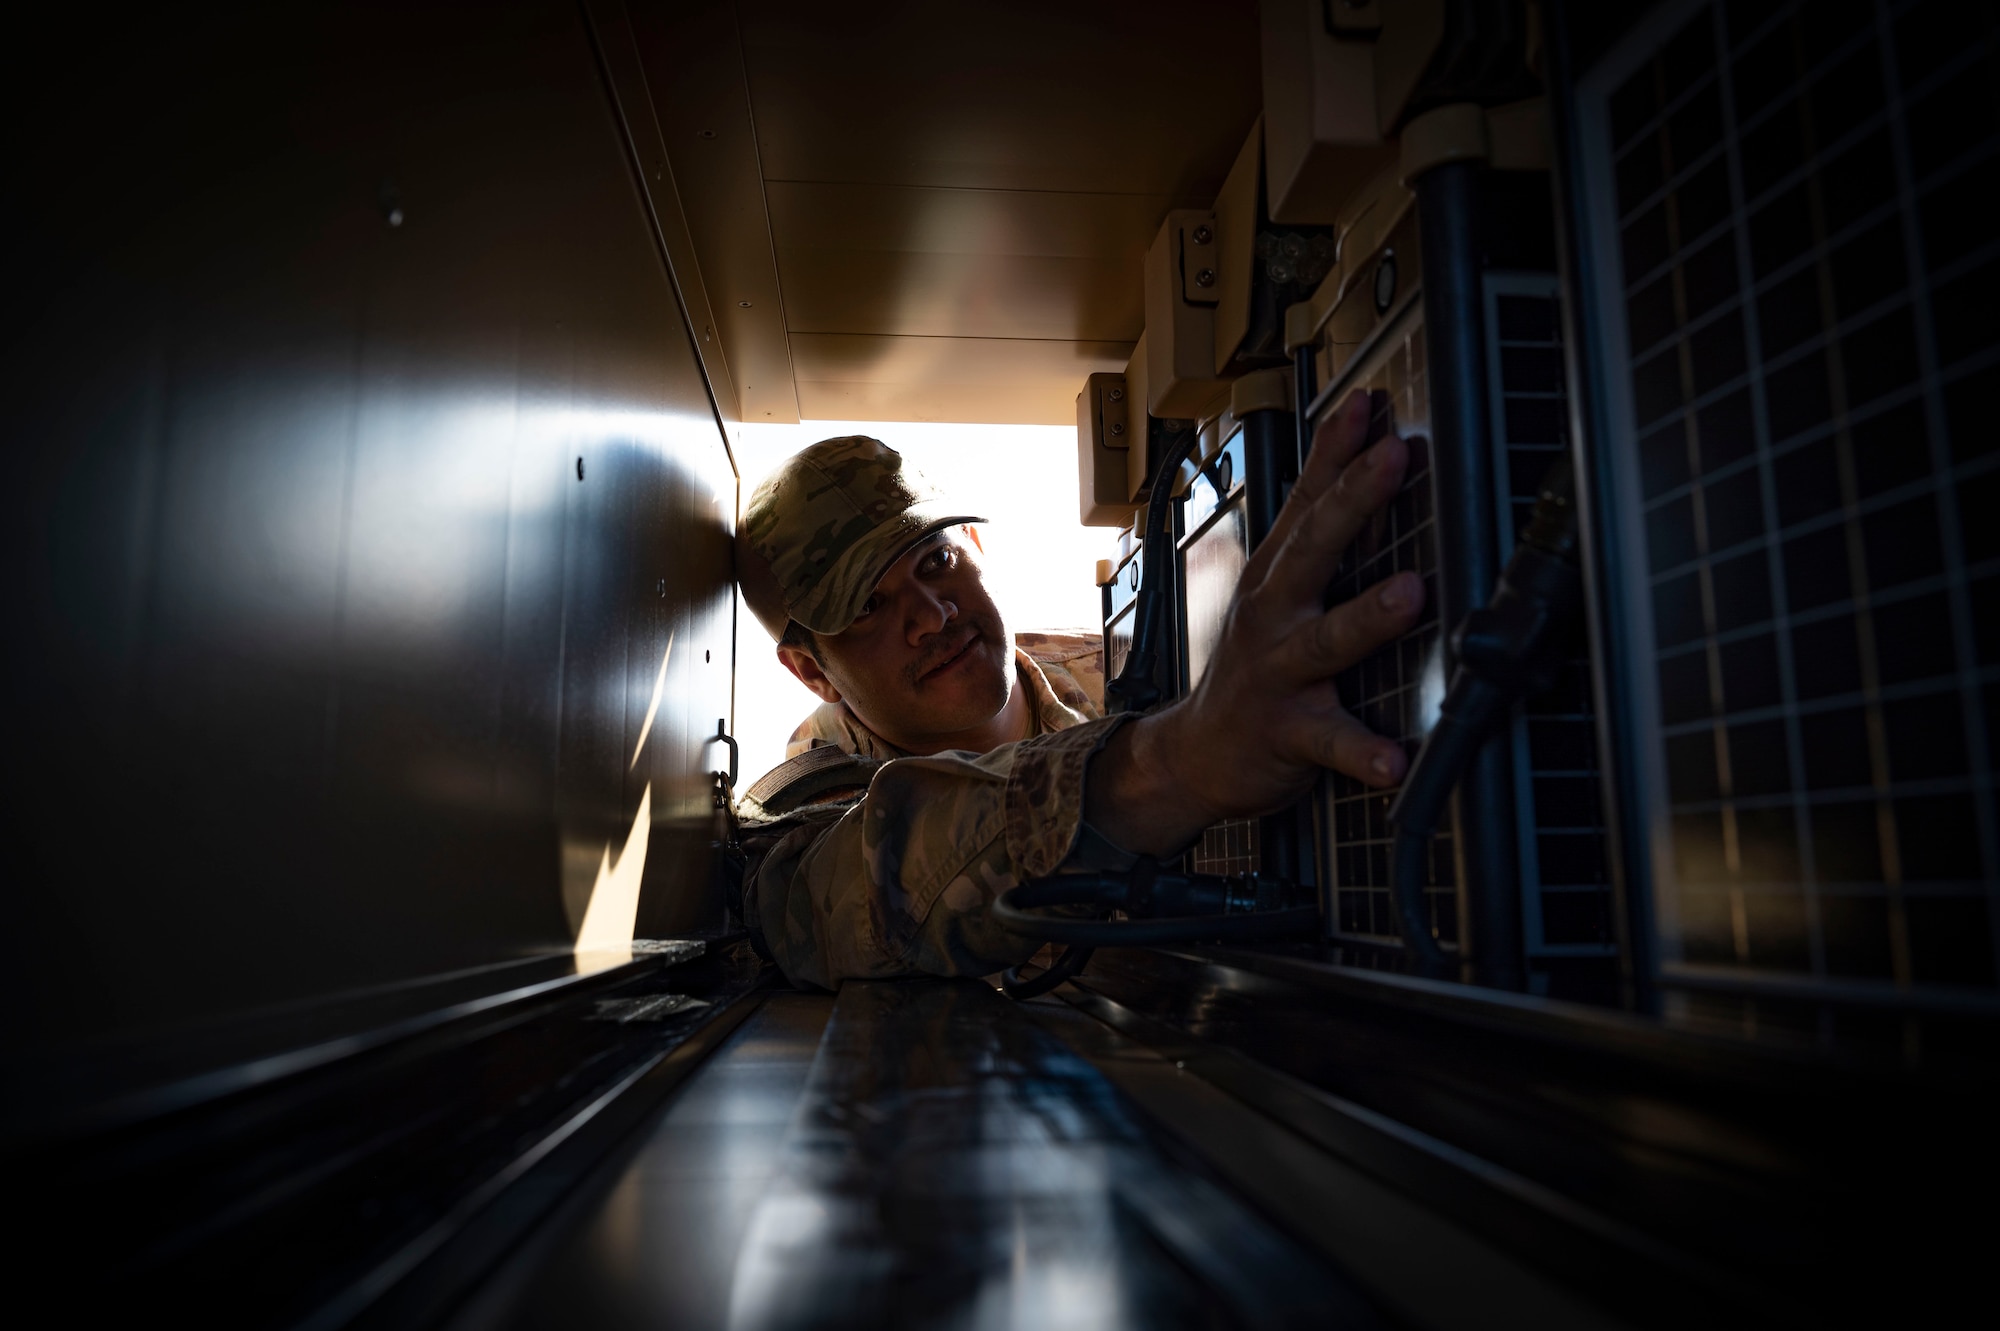 U.S. Air Force Staff Sgt. Daniel Santiago, 1st Special Operations Civil Engineer Squadron electrician, stores a group of Expeditionary Aircraft Lighting System lights during a training course at Holloman Air force Base, New Mexico, Dec. 14, 2023. The Basic Expeditionary Airfield Resources or BEAR unit is one of 5 locations that provide civil engineers with the training needed to utilize the EALS lighting systems effectively. (U.S. Air Force photo by Airman 1st Class Isaiah Pedrazzini)